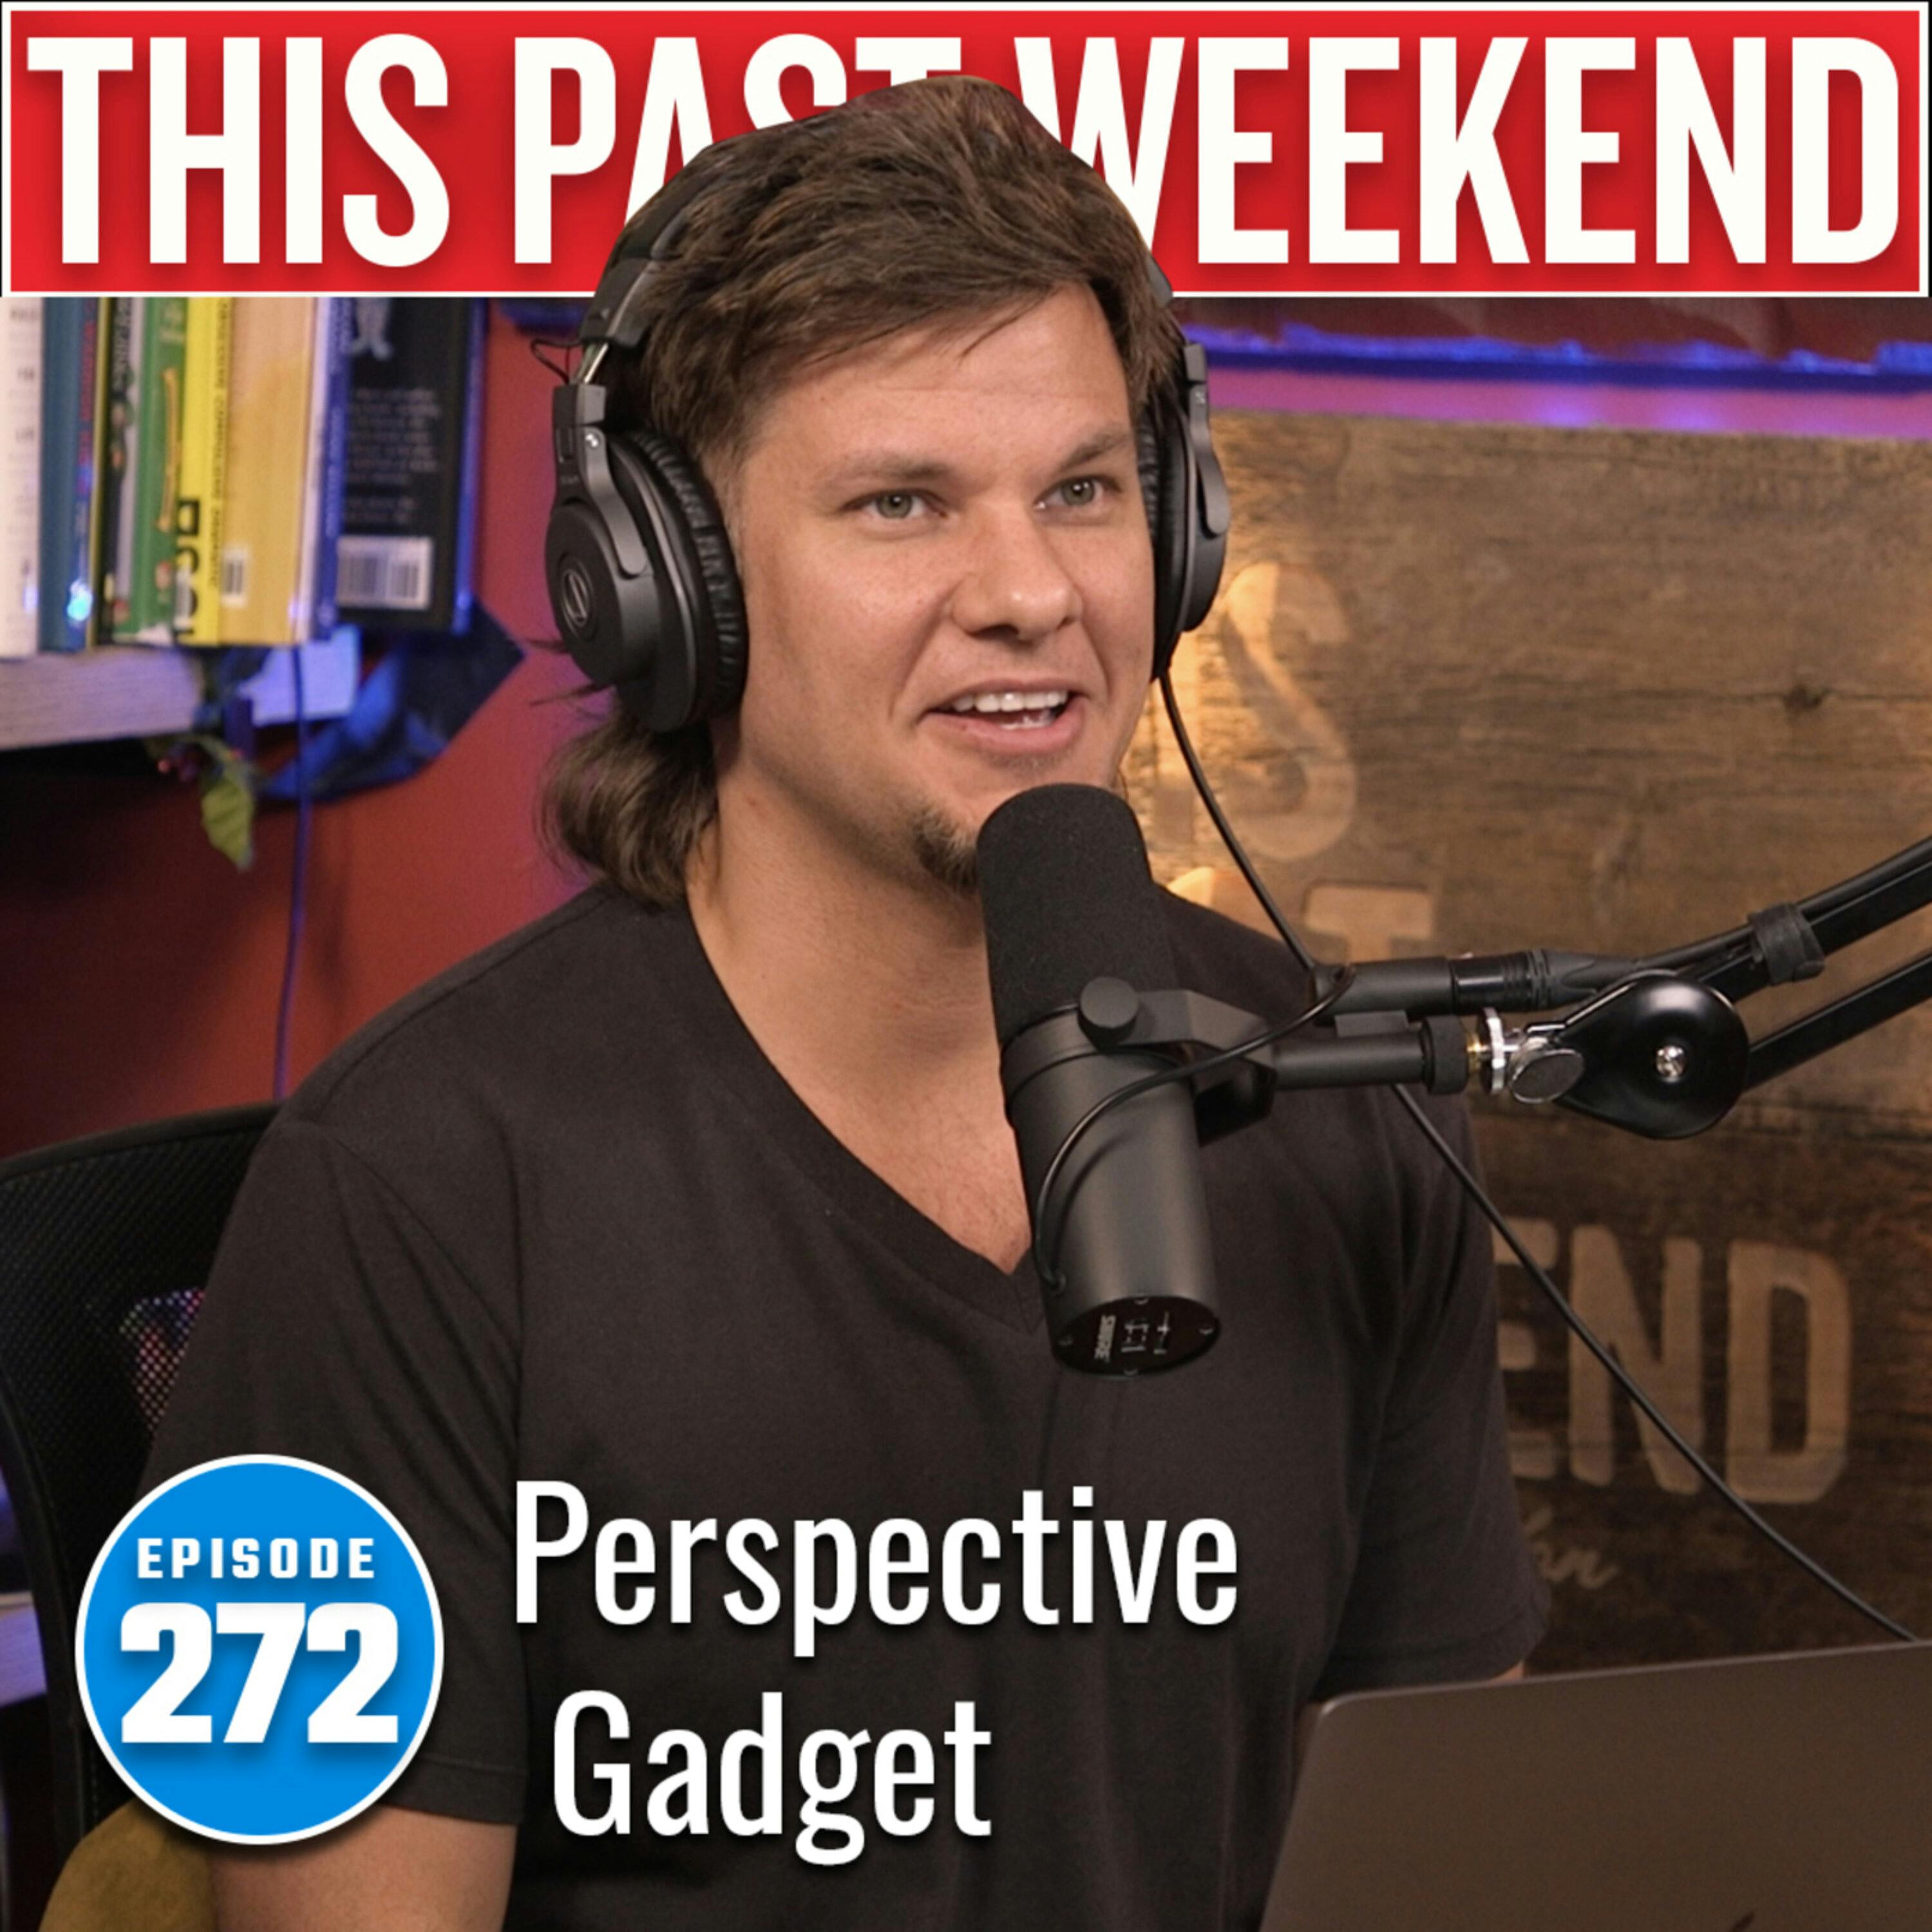 Perspective Gadget | This Past Weekend #272